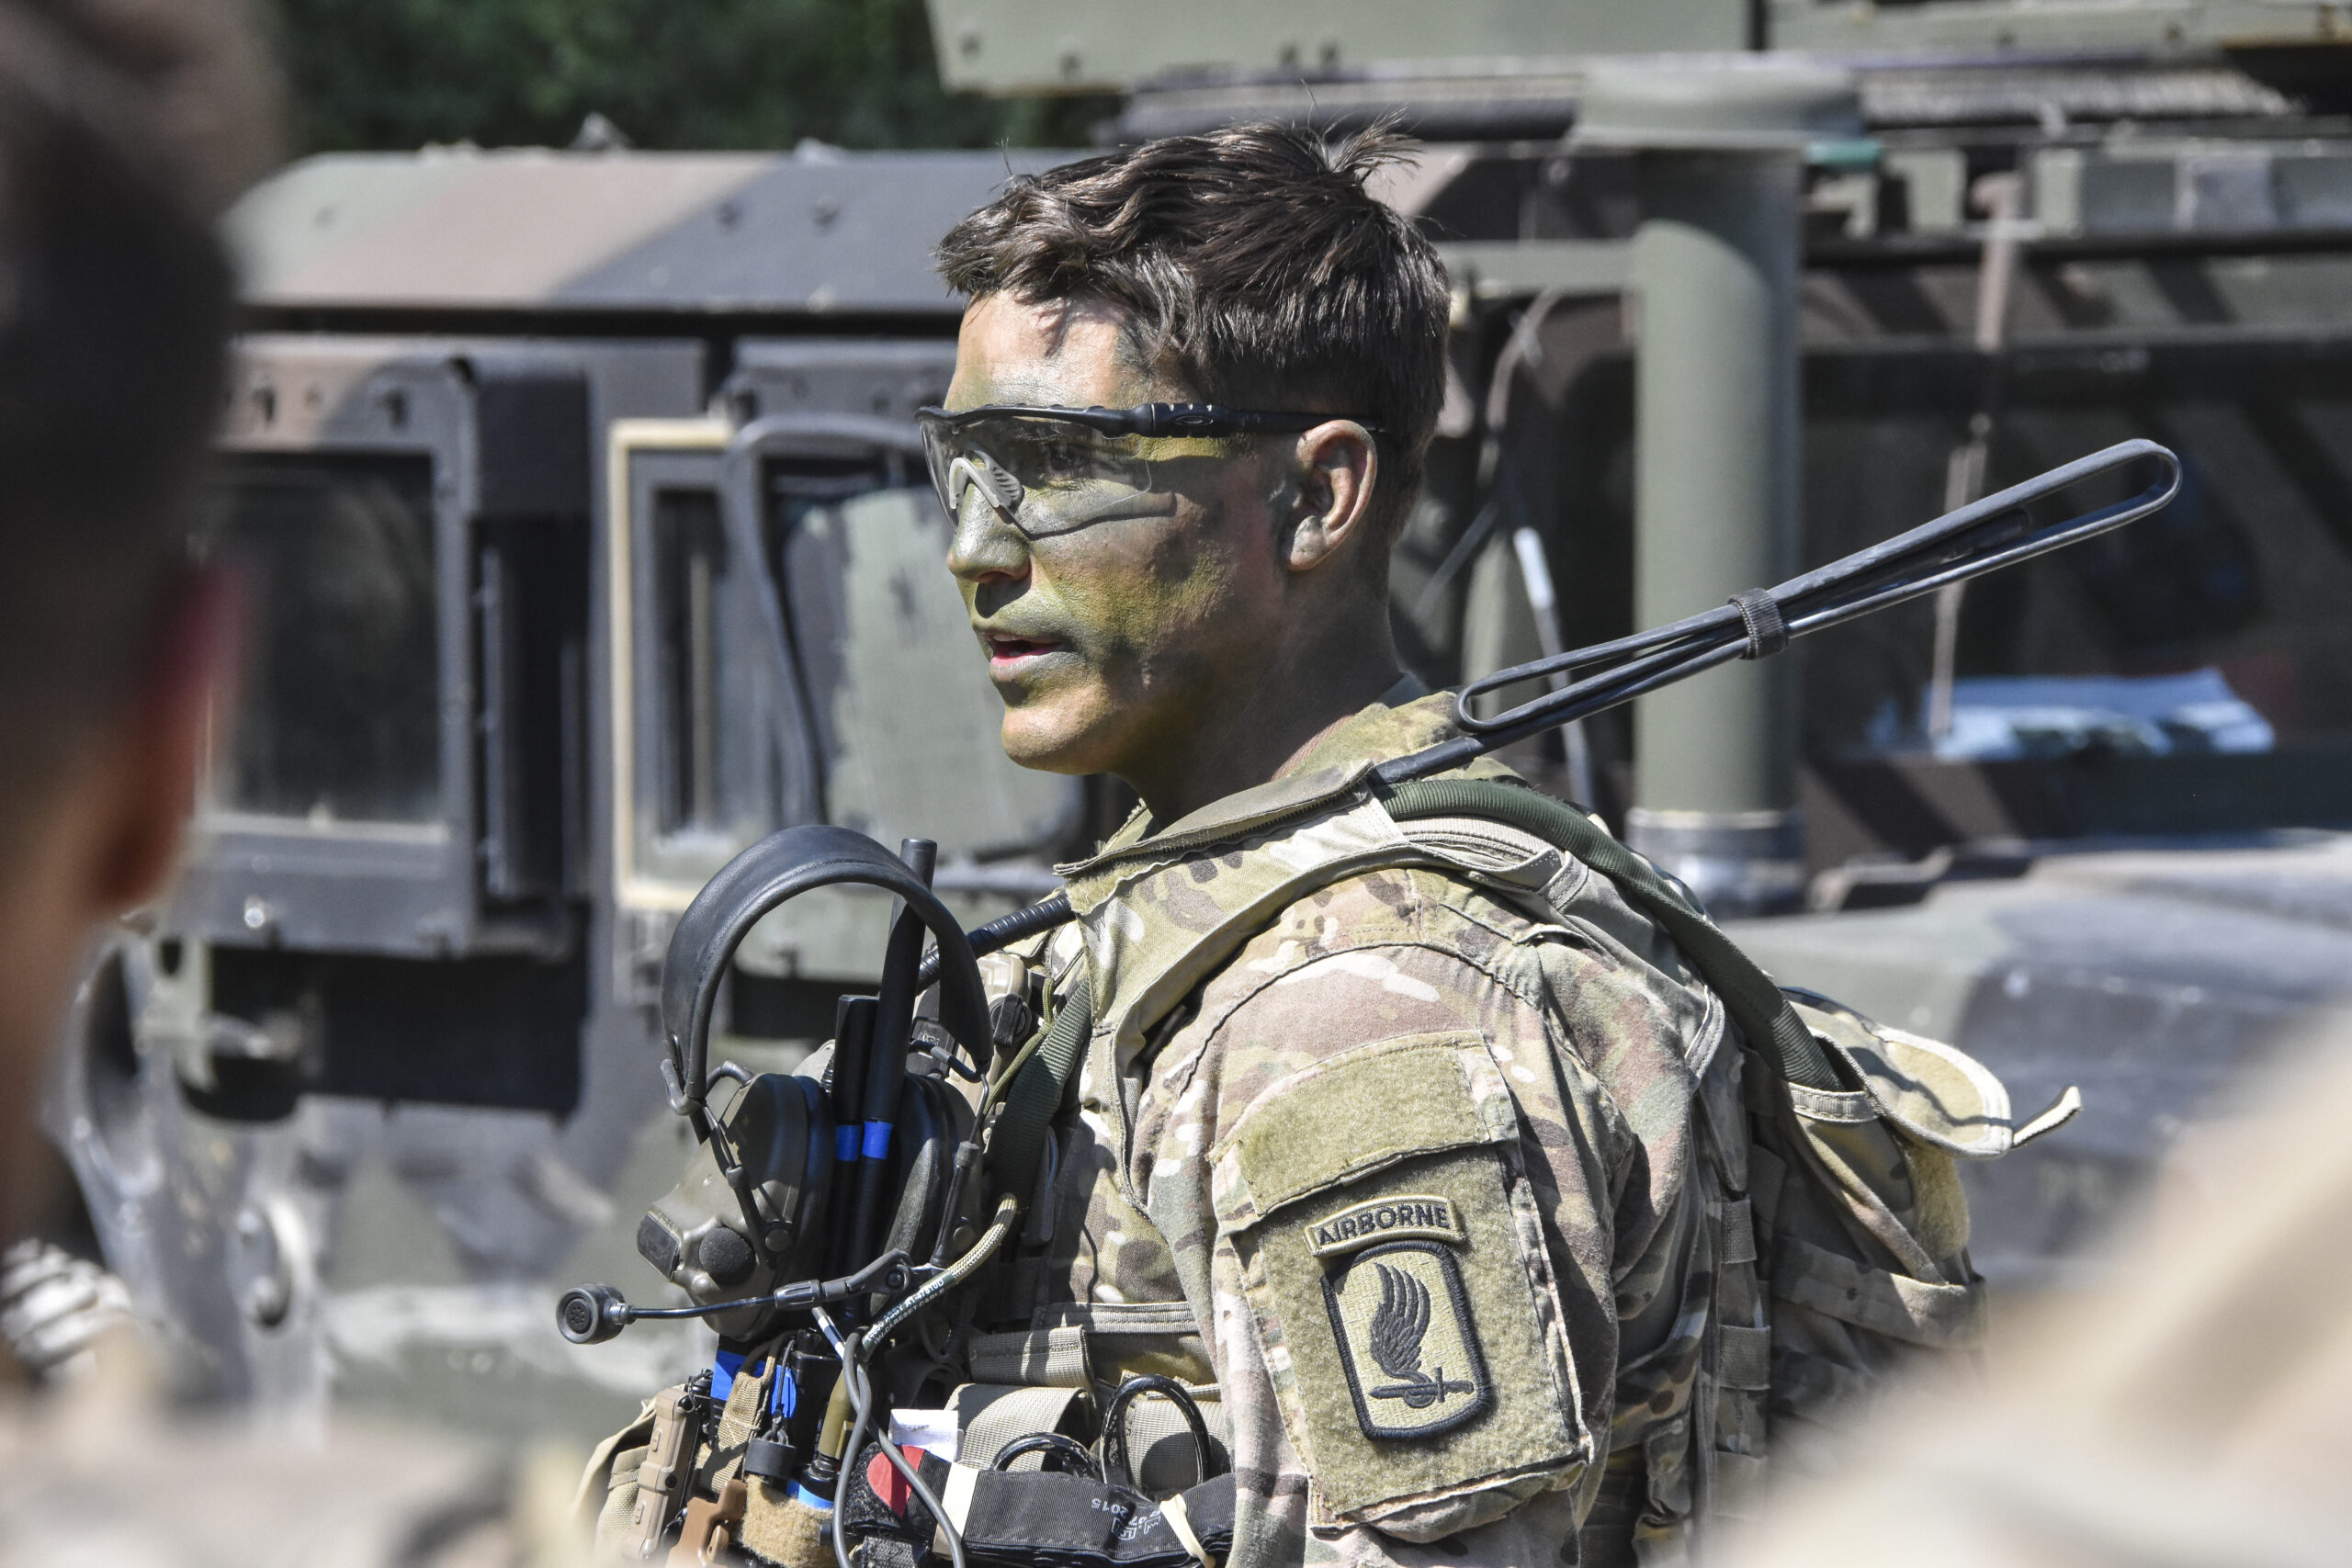 The Command Sergeant Major for 1/91 Cavalry Regiment of the 173rd Airborne Brigade gives guidance prior to a combine arms training exercise.